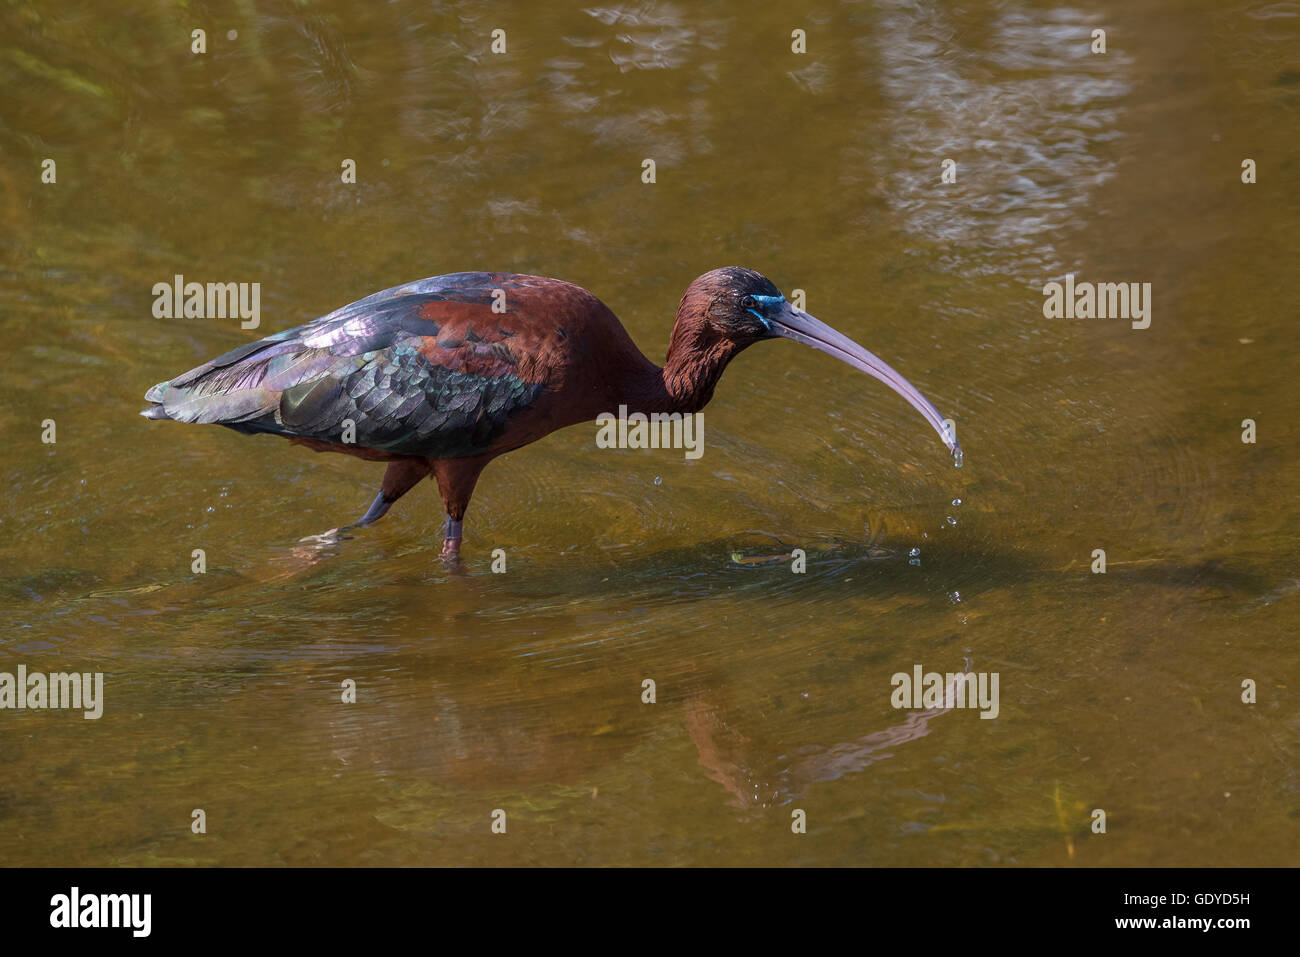 Glossy Ibis bird wading with reflections in the water Stock Photo